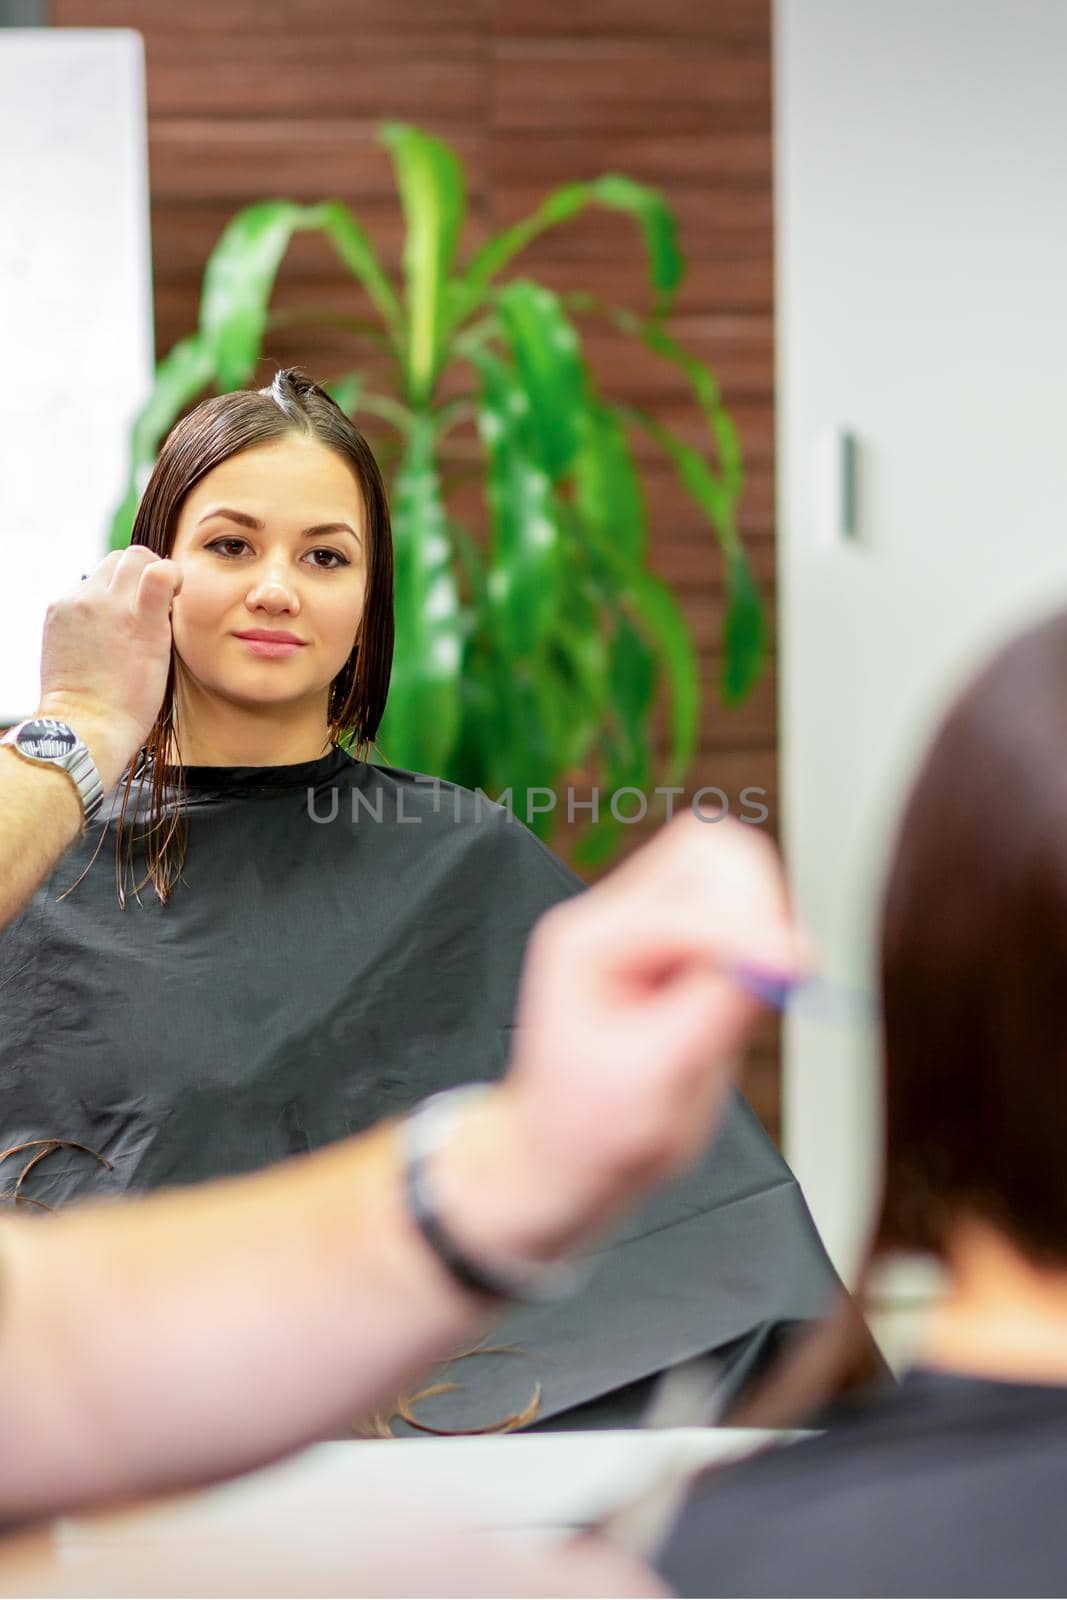 Reflection in the mirror of the young caucasian woman sitting and receiving haircut by male hairdresser at hairdresser salon